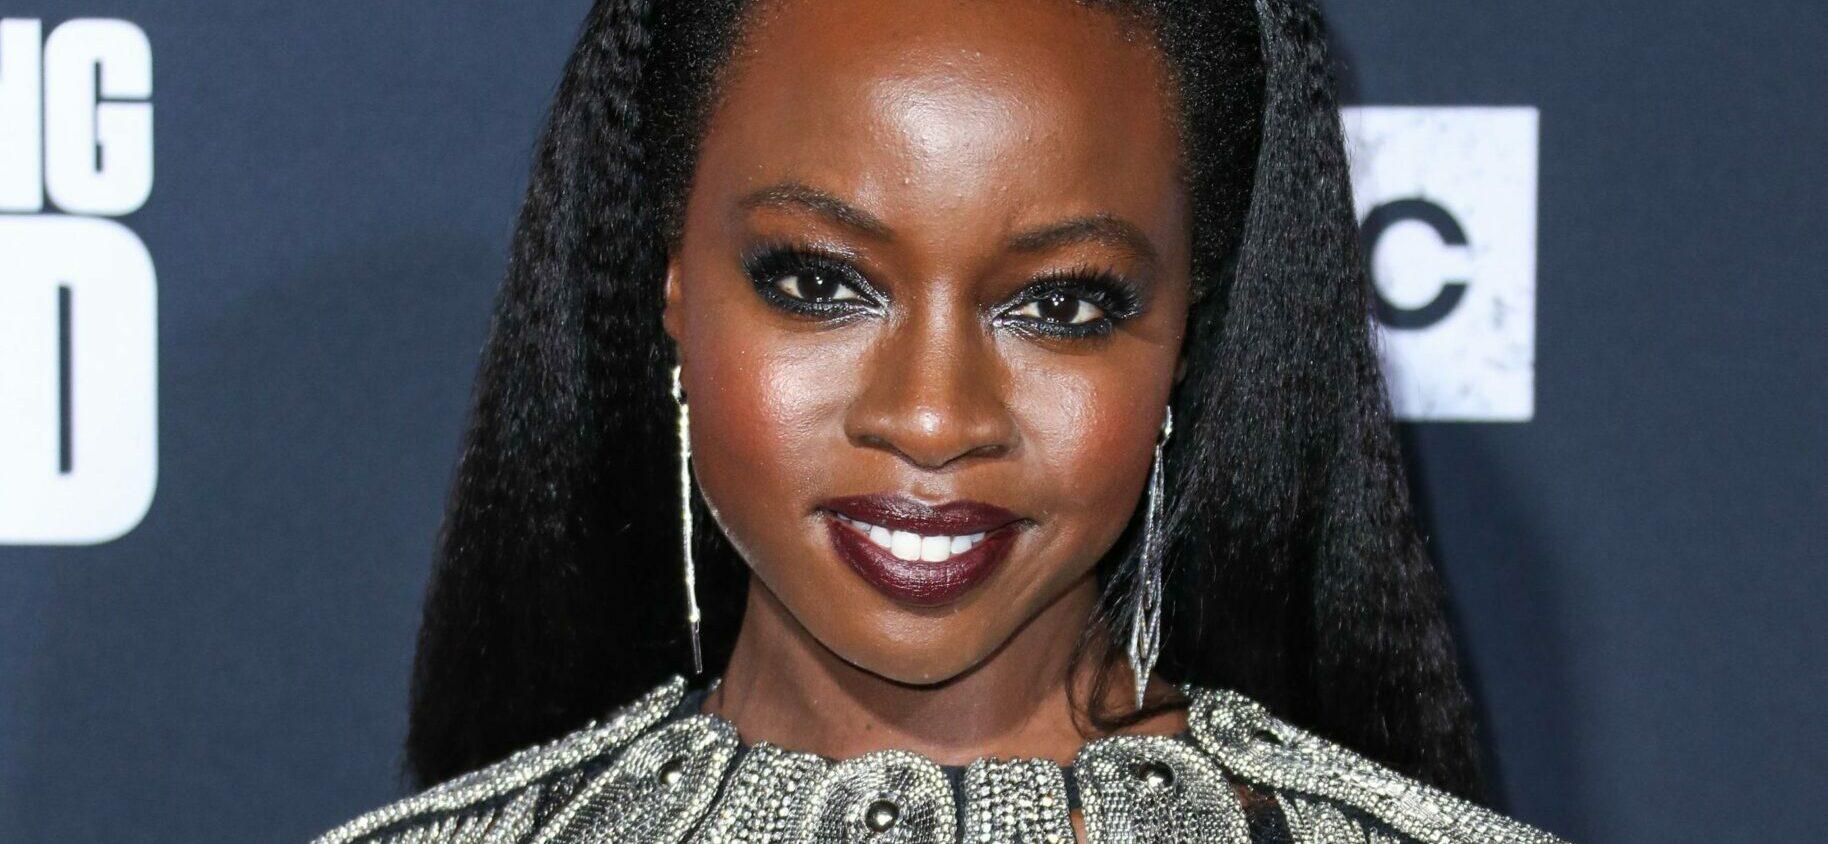 HOLLYWOOD, LOS ANGELES, CALIFORNIA, USA - SEPTEMBER 23: Los Angeles Special Screening Of AMC's 'The Walking Dead' Season 10 held at the TCL Chinese Theatre IMAX on September 23, 2019 in Hollywood, Los Angeles, California, United States. 23 Sep 2019 Pictured: Danai Gurira.